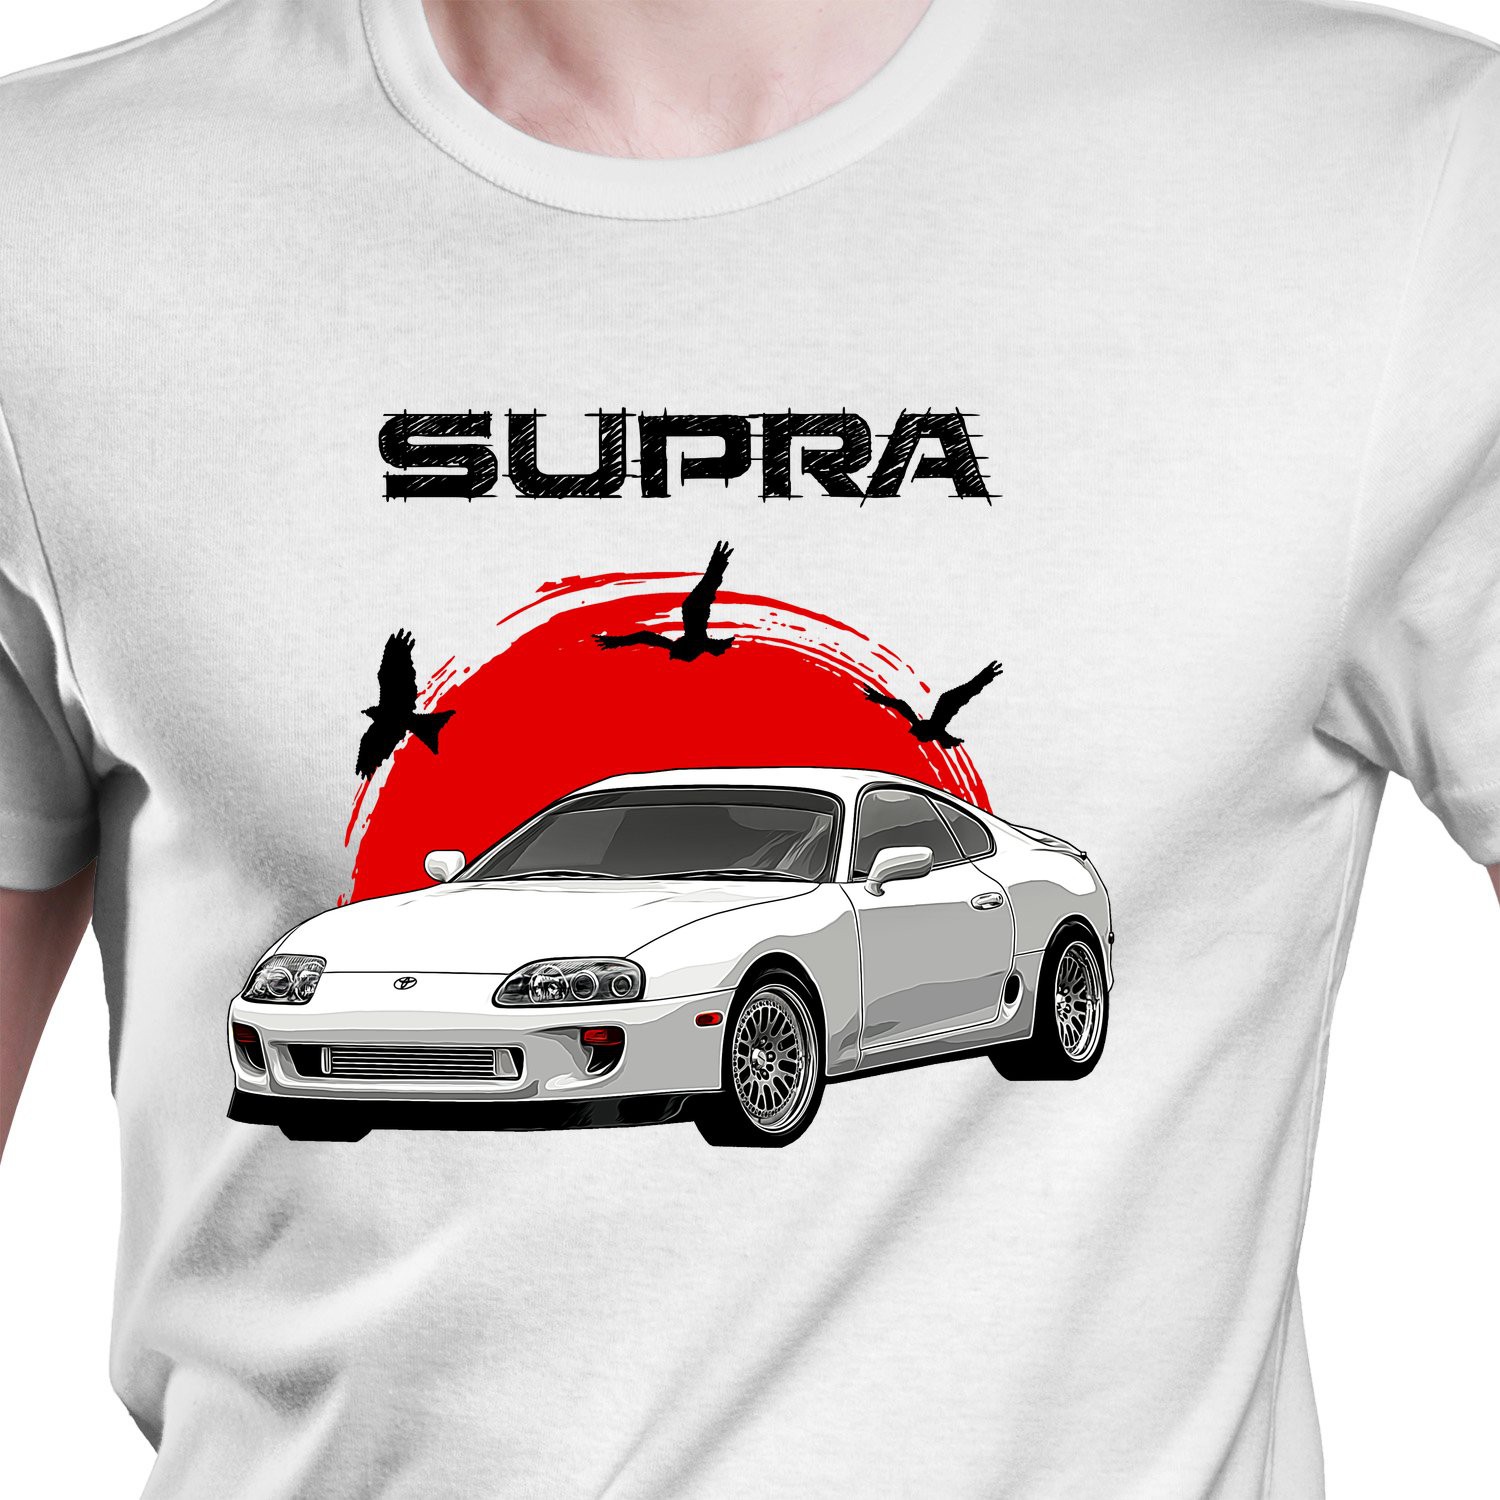 White T-shirt with Toyota Supra Best for gift. Japan Cars Lovers.